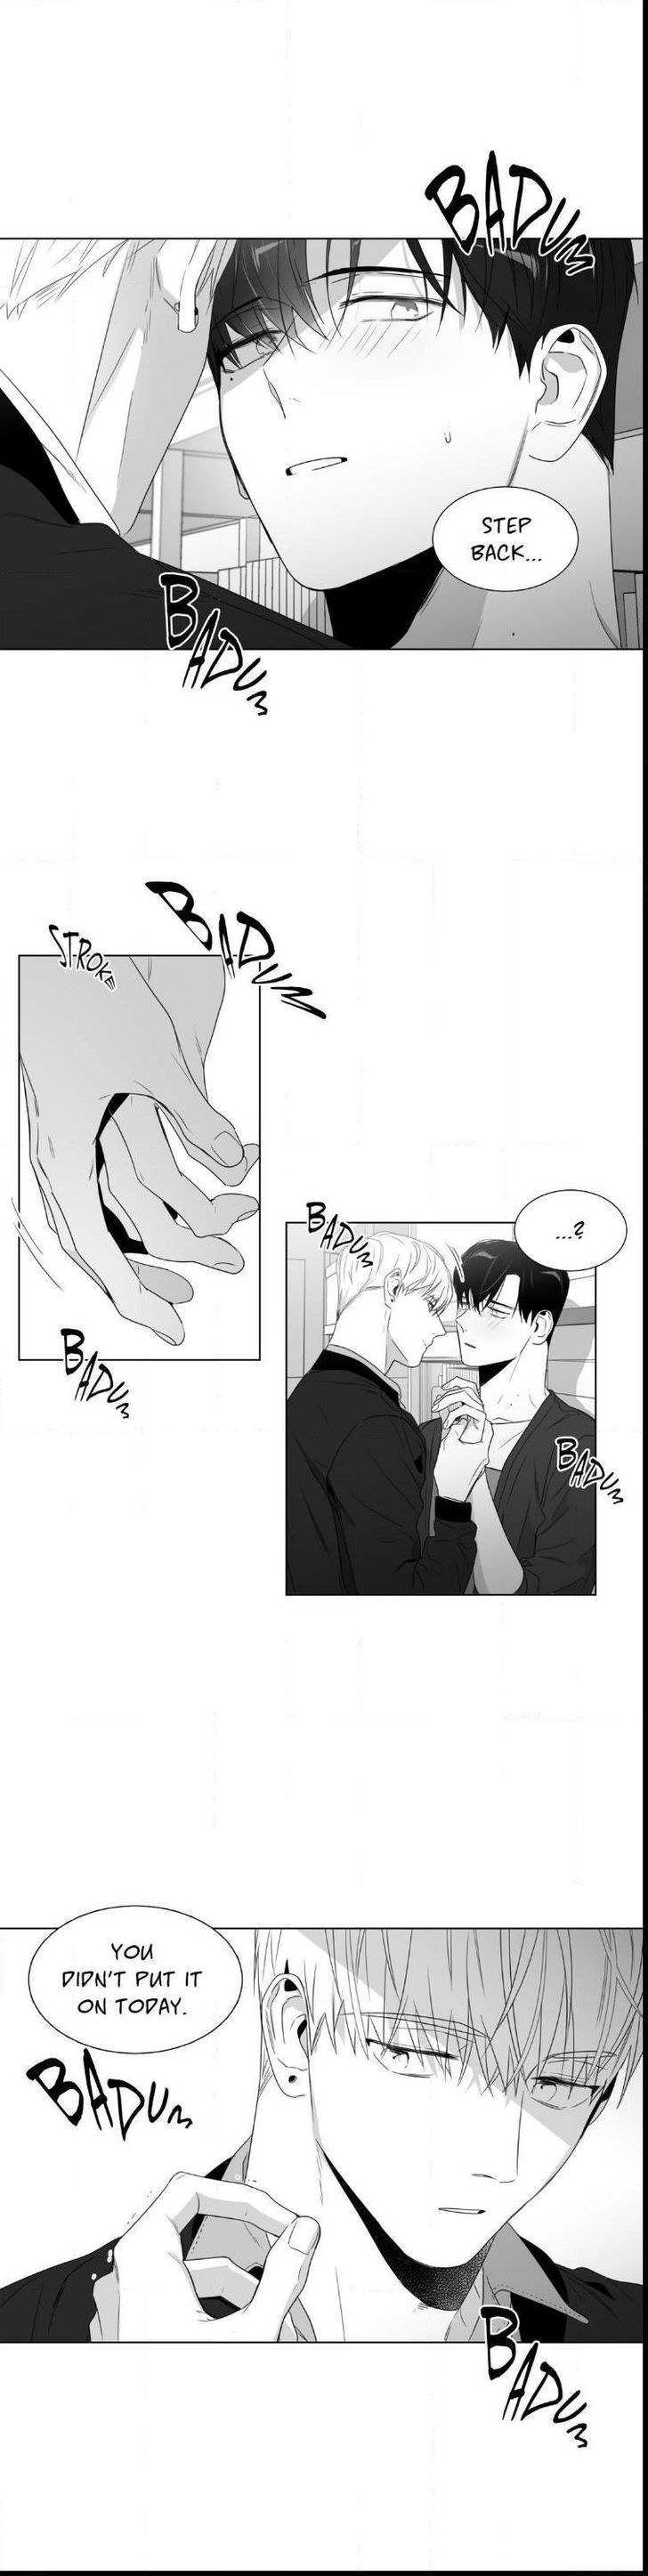 Lover Boy (Lezhin) Chapter 051 page 6